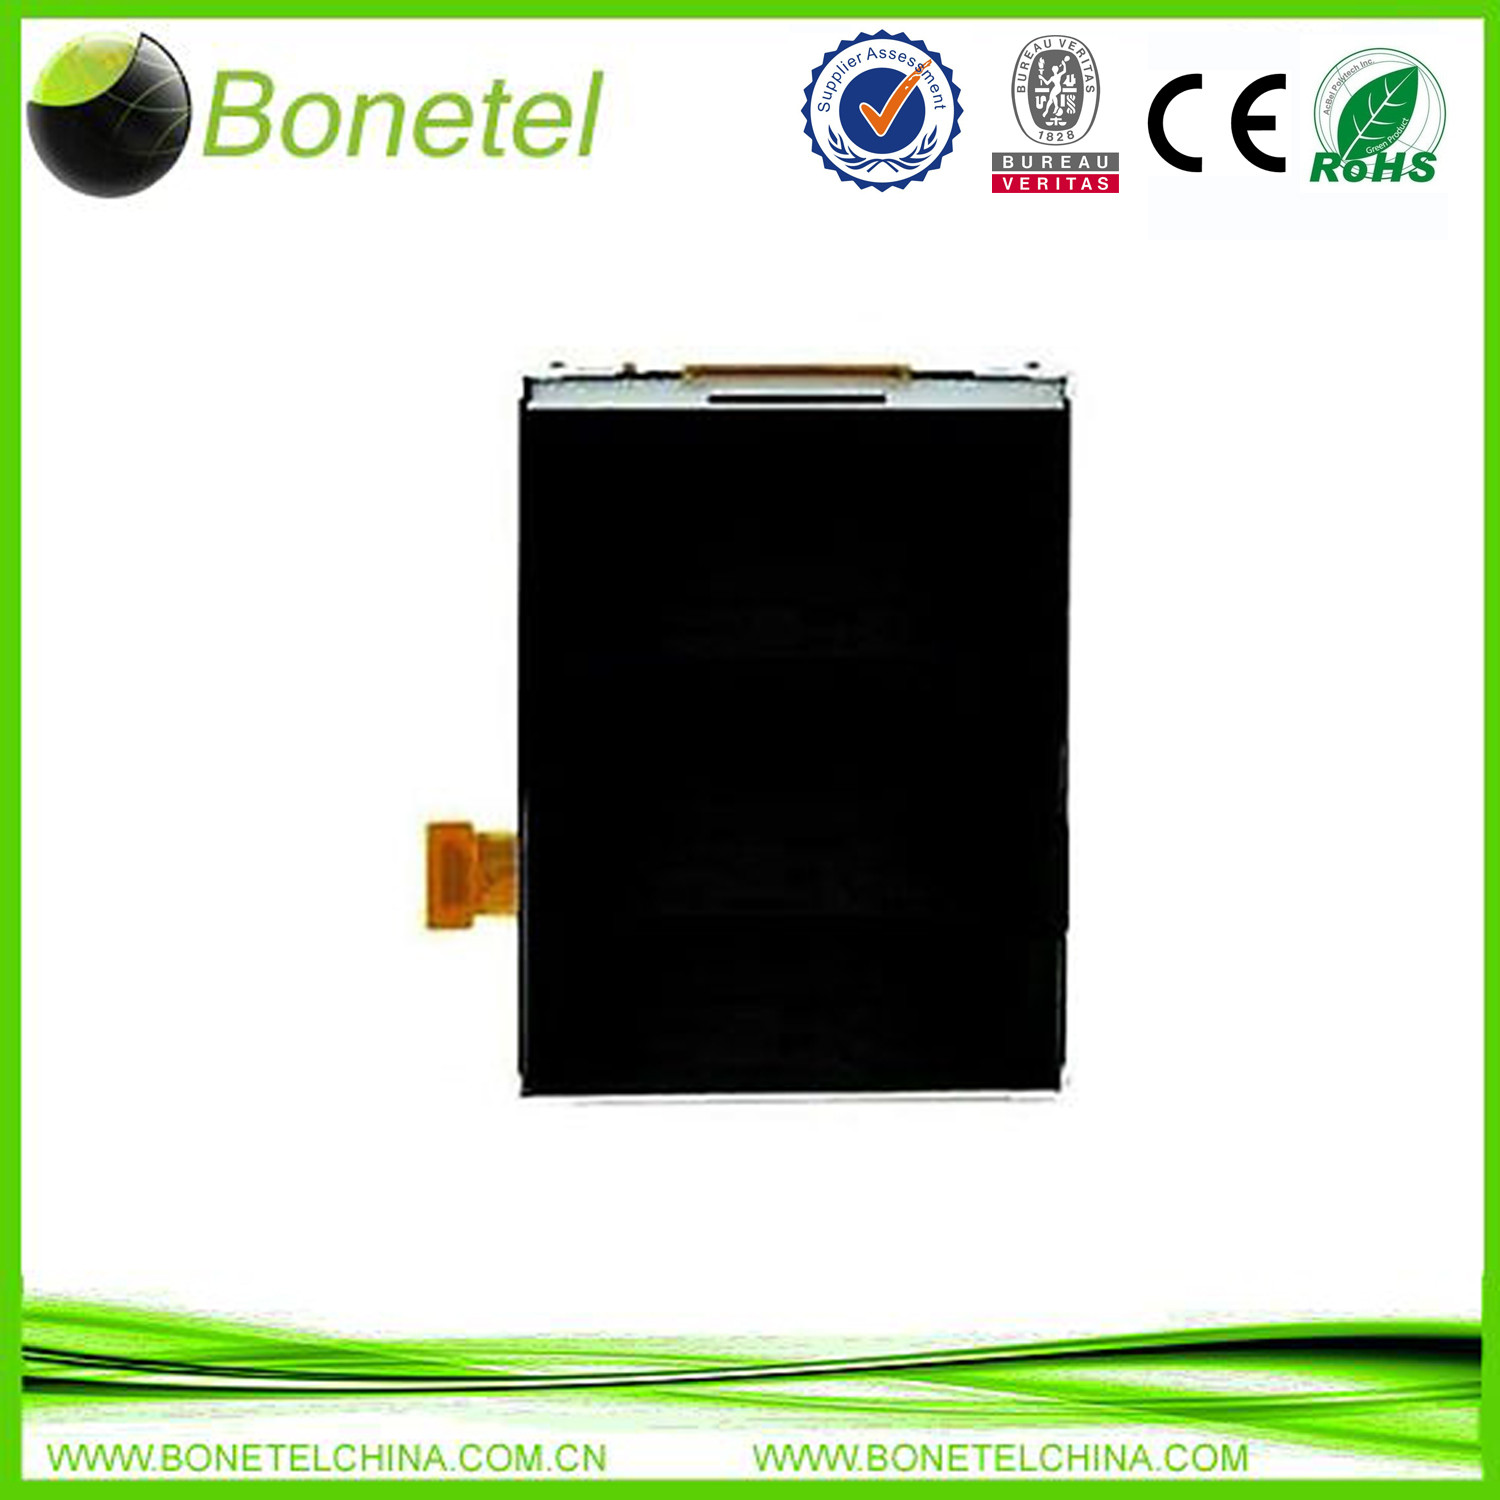 NEW Replacement LCD Screen Display Repair Part For Samsung Galaxy Y Young S5360